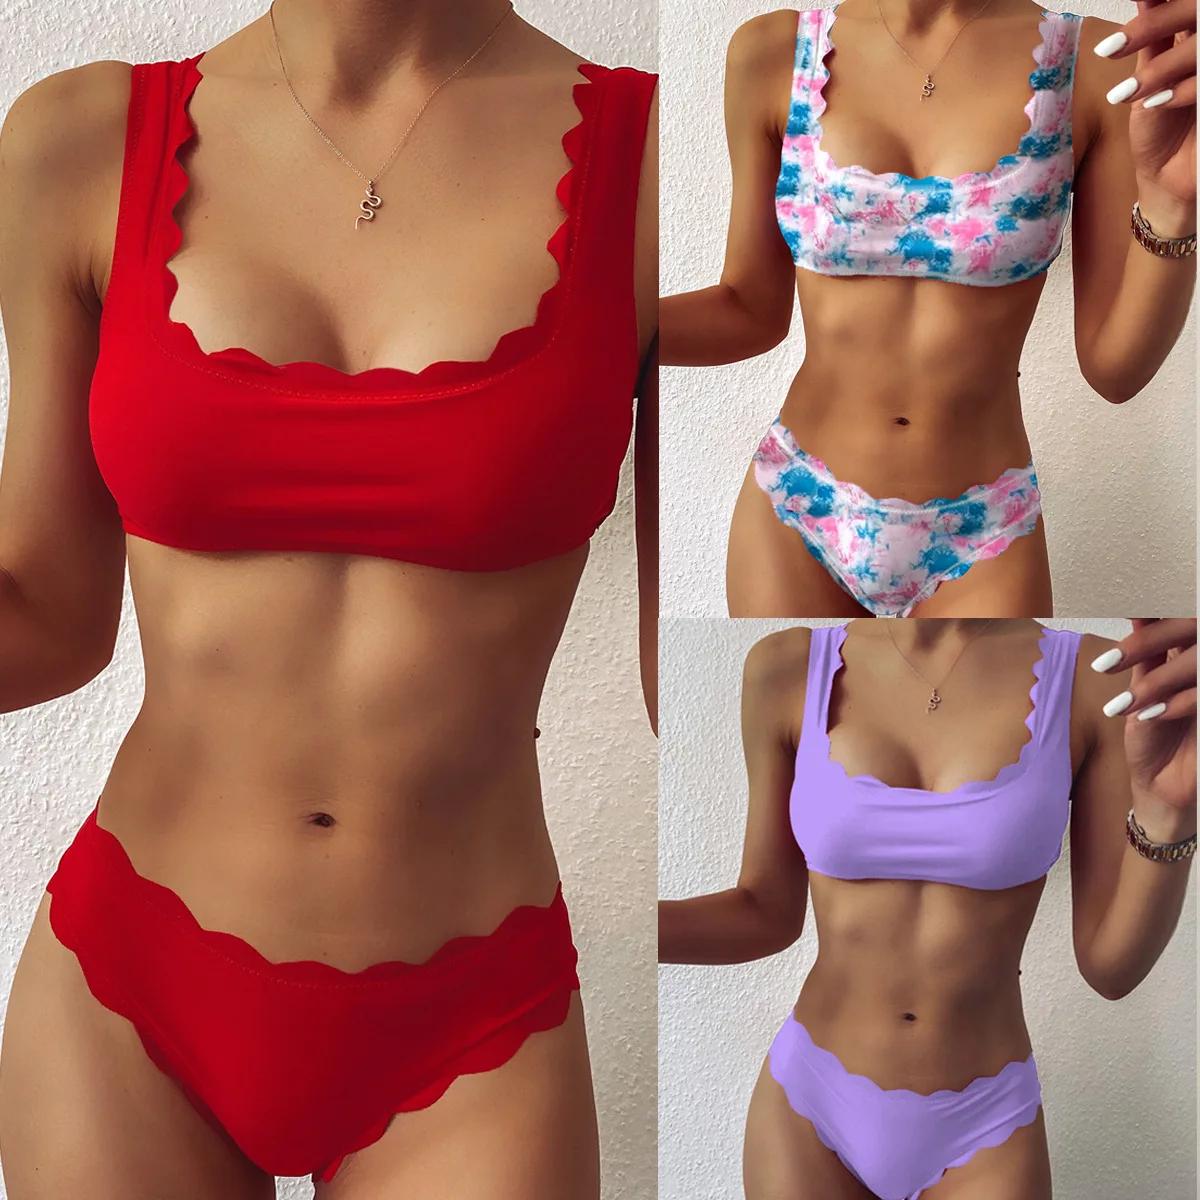 Floral Scalloped Bikini Sets Women Sexy Solid Mid-Waist Two Pieces Swimsuit 2021 Beach Bathing Suits Swimwear sexy beach bikini sets bathing suits candy colors swimsuit sexy bikini swimwear